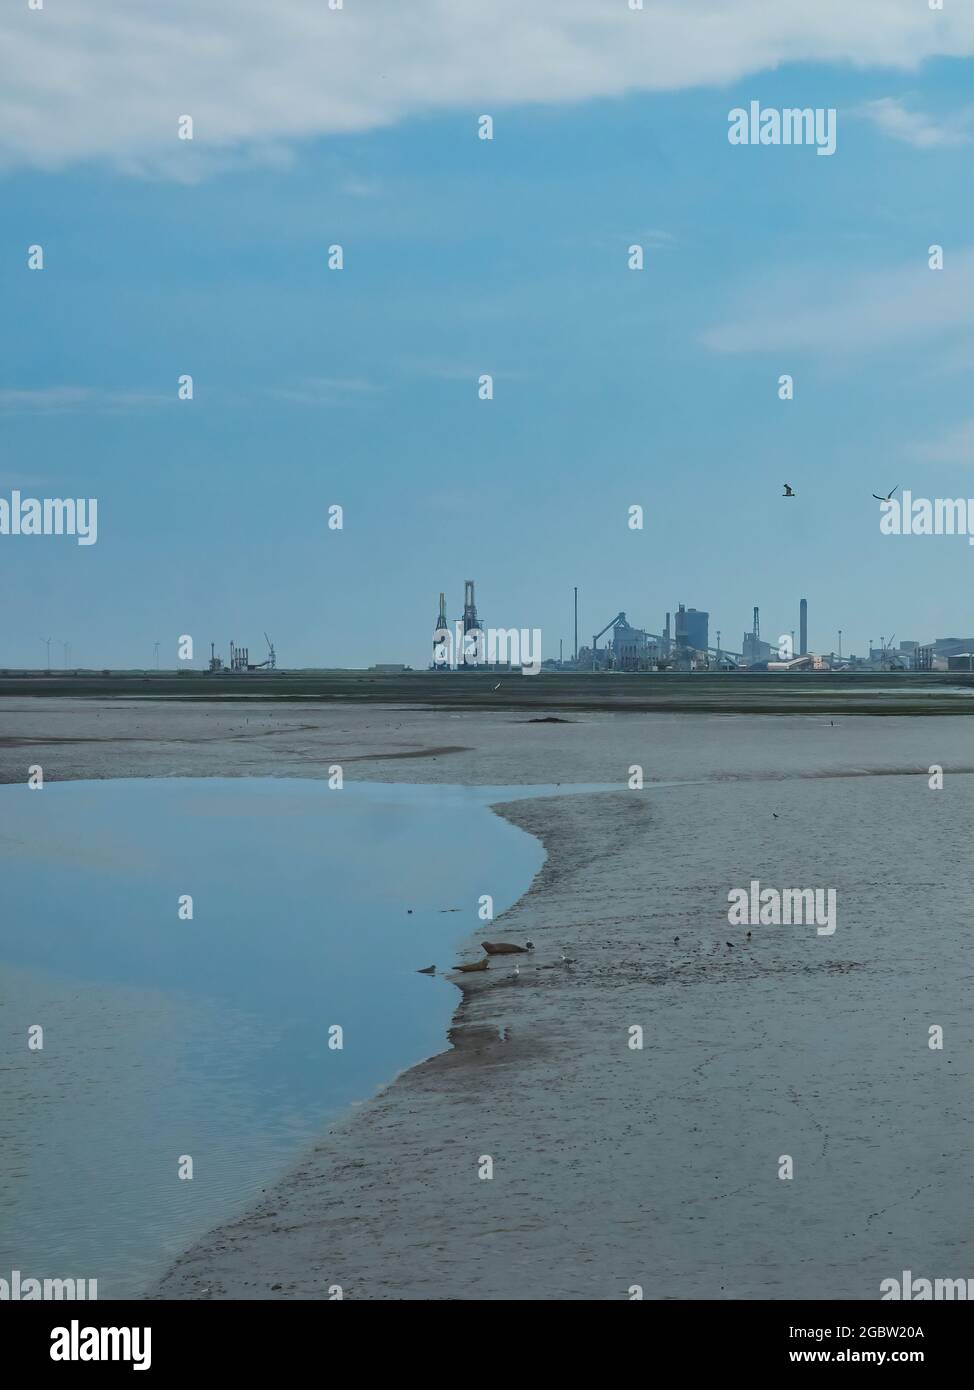 Industry and nature side by side with a seal family on mudflats by a glassy stream and gulls in the air ahead of an industrial horizon and a blue sky. Stock Photo